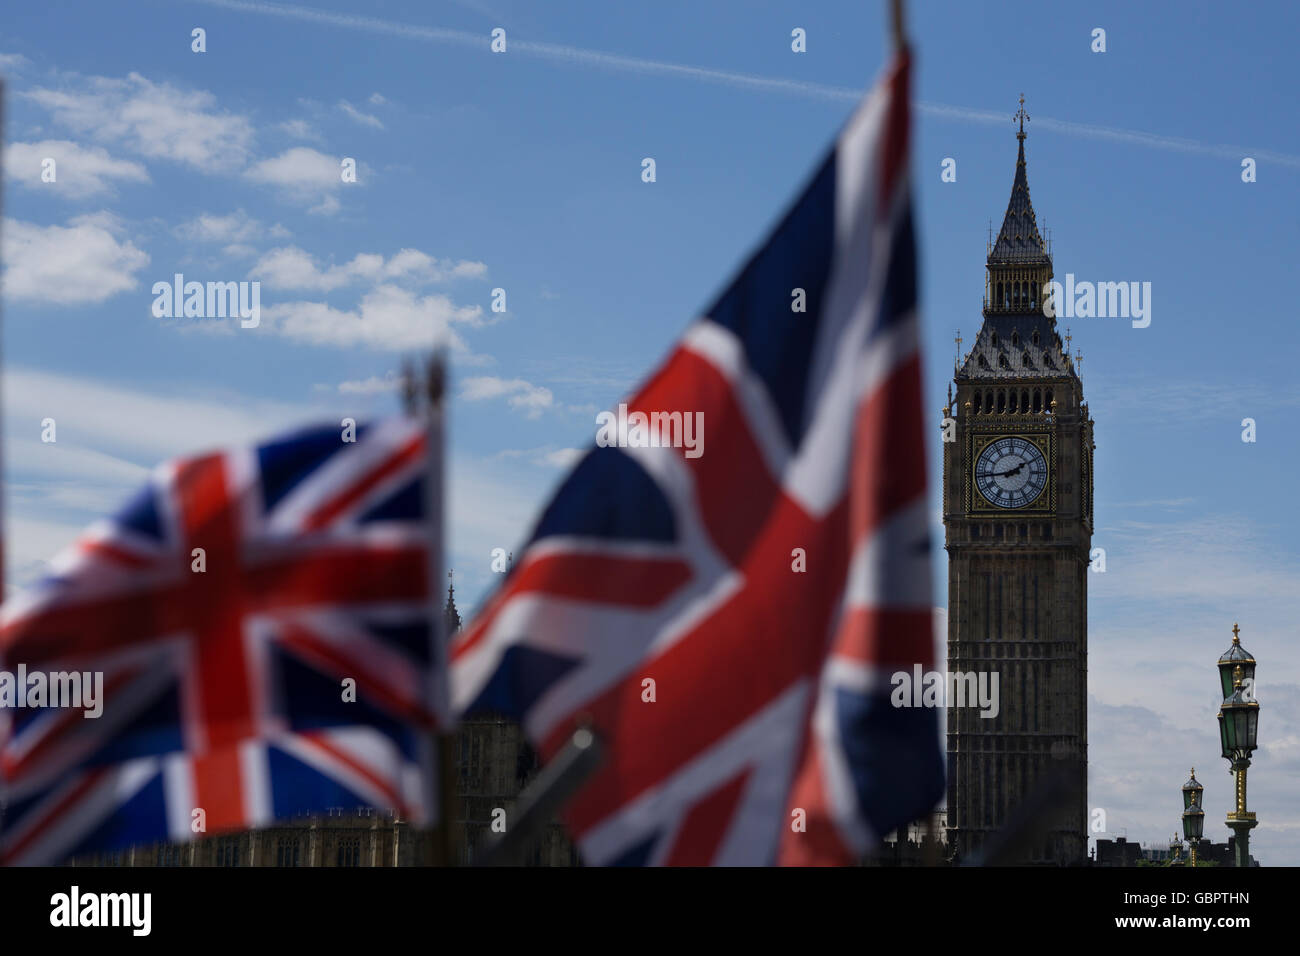 Famous London landmark of Big Ben prominent in the background behind two British Union Jack Flags Stock Photo